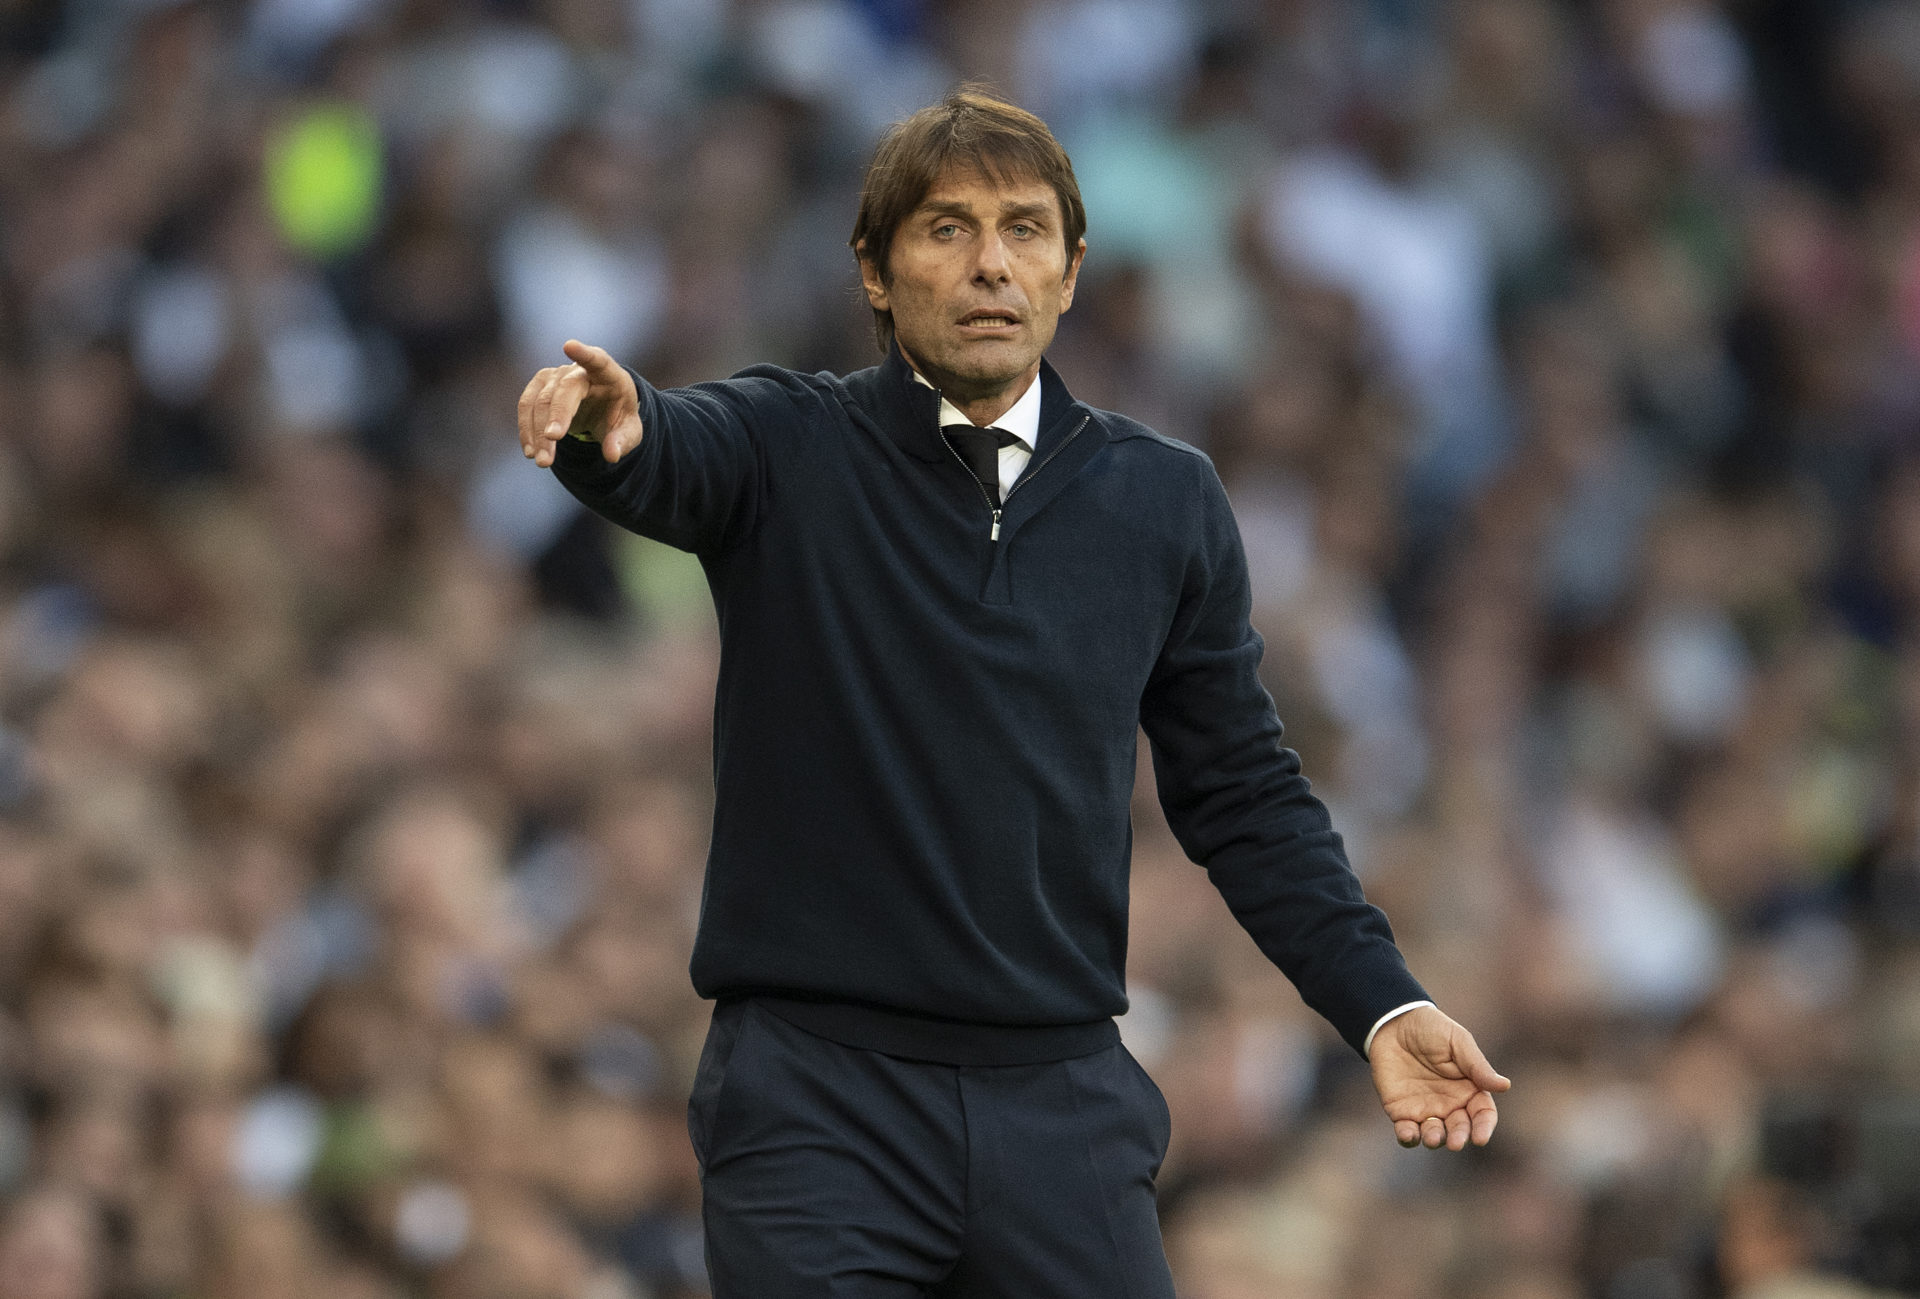 Conte would leave Tottenham for Juventus